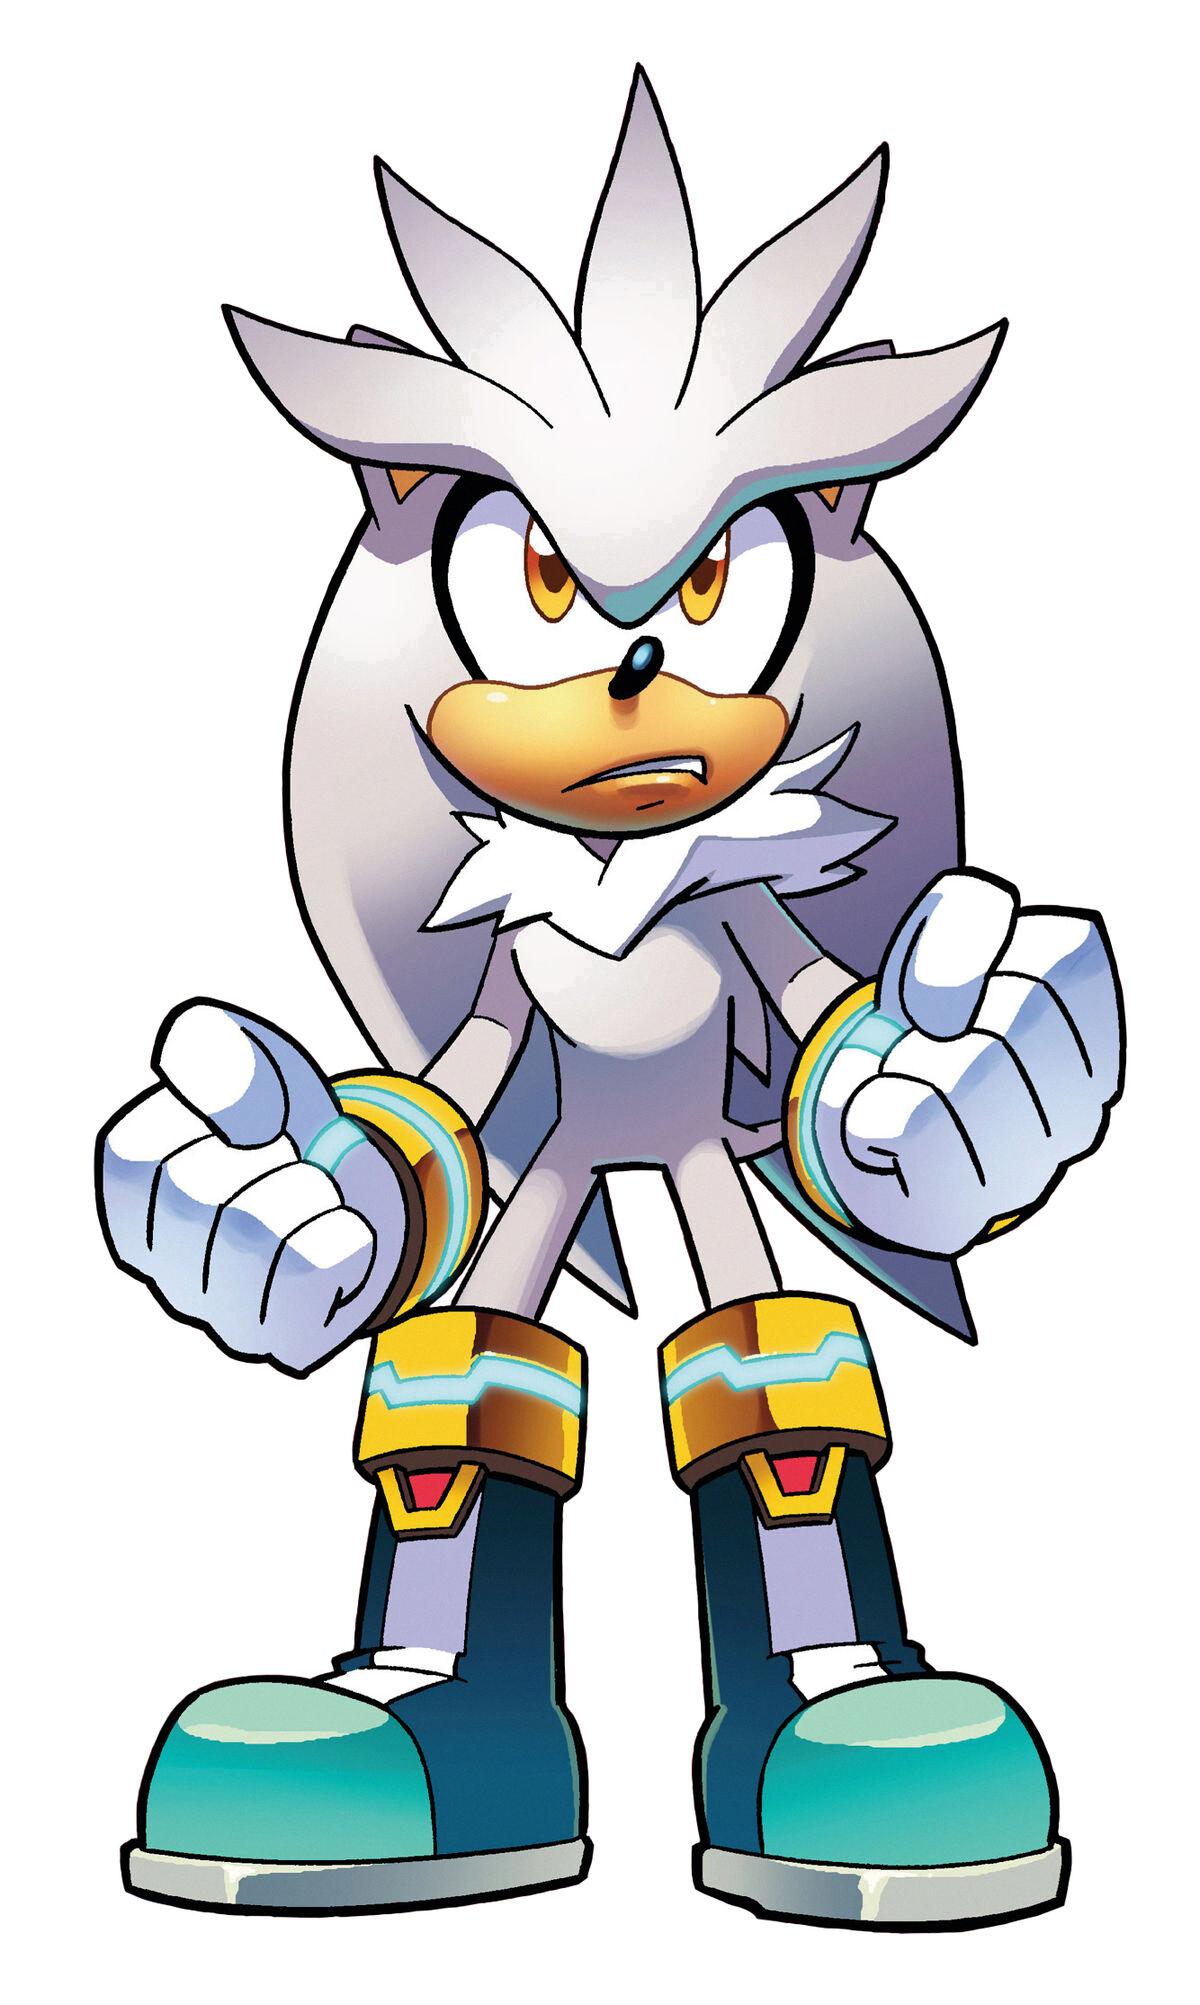 is silver sonics son